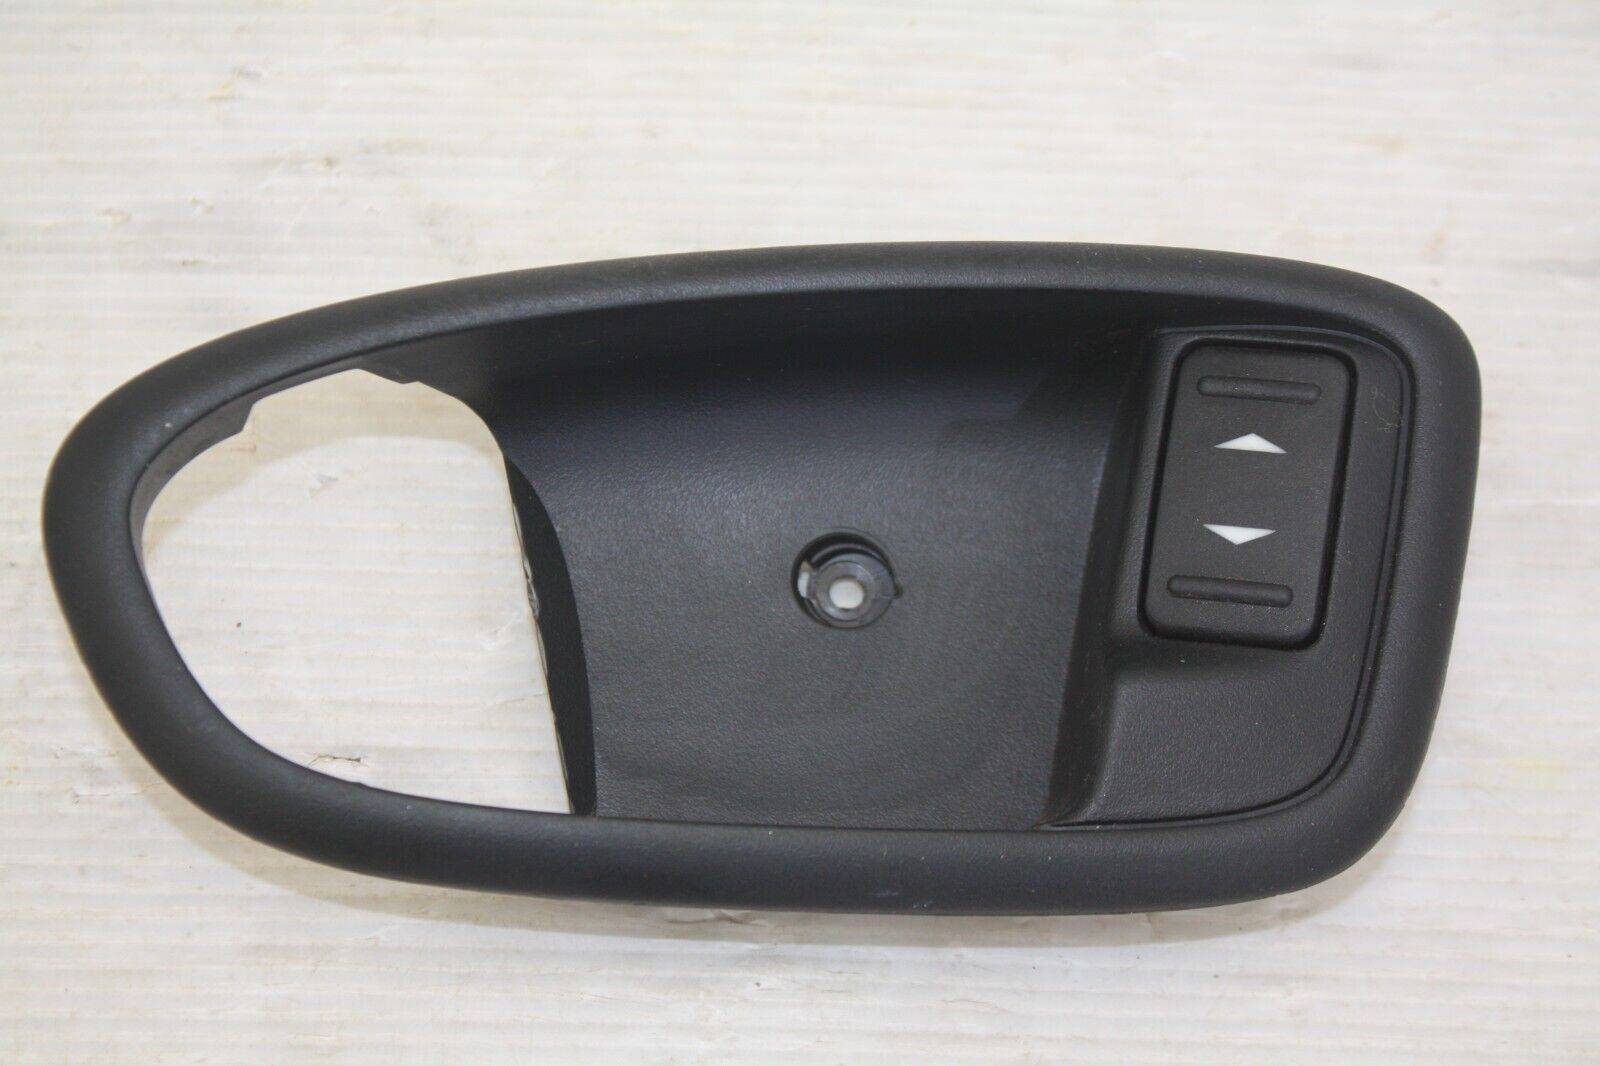 Ford-S-Max-Front-Left-Door-Handle-Surround-Trim-2010-to-2015-6M21-U226A37-BCW-176008398752